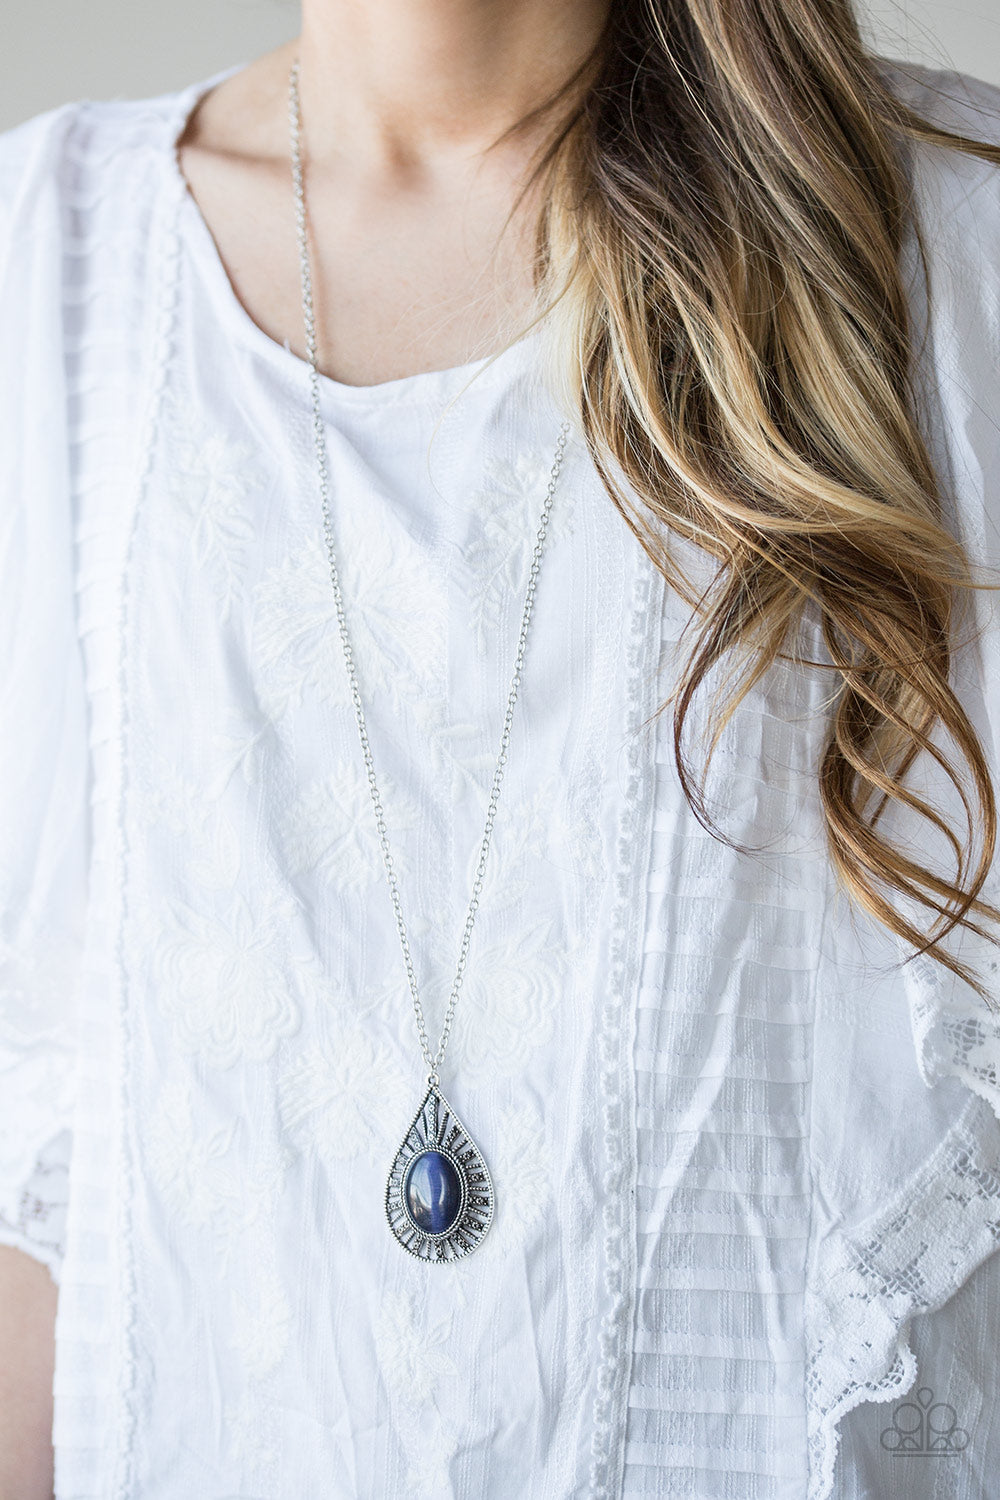 Total Tranquility - Blue necklace